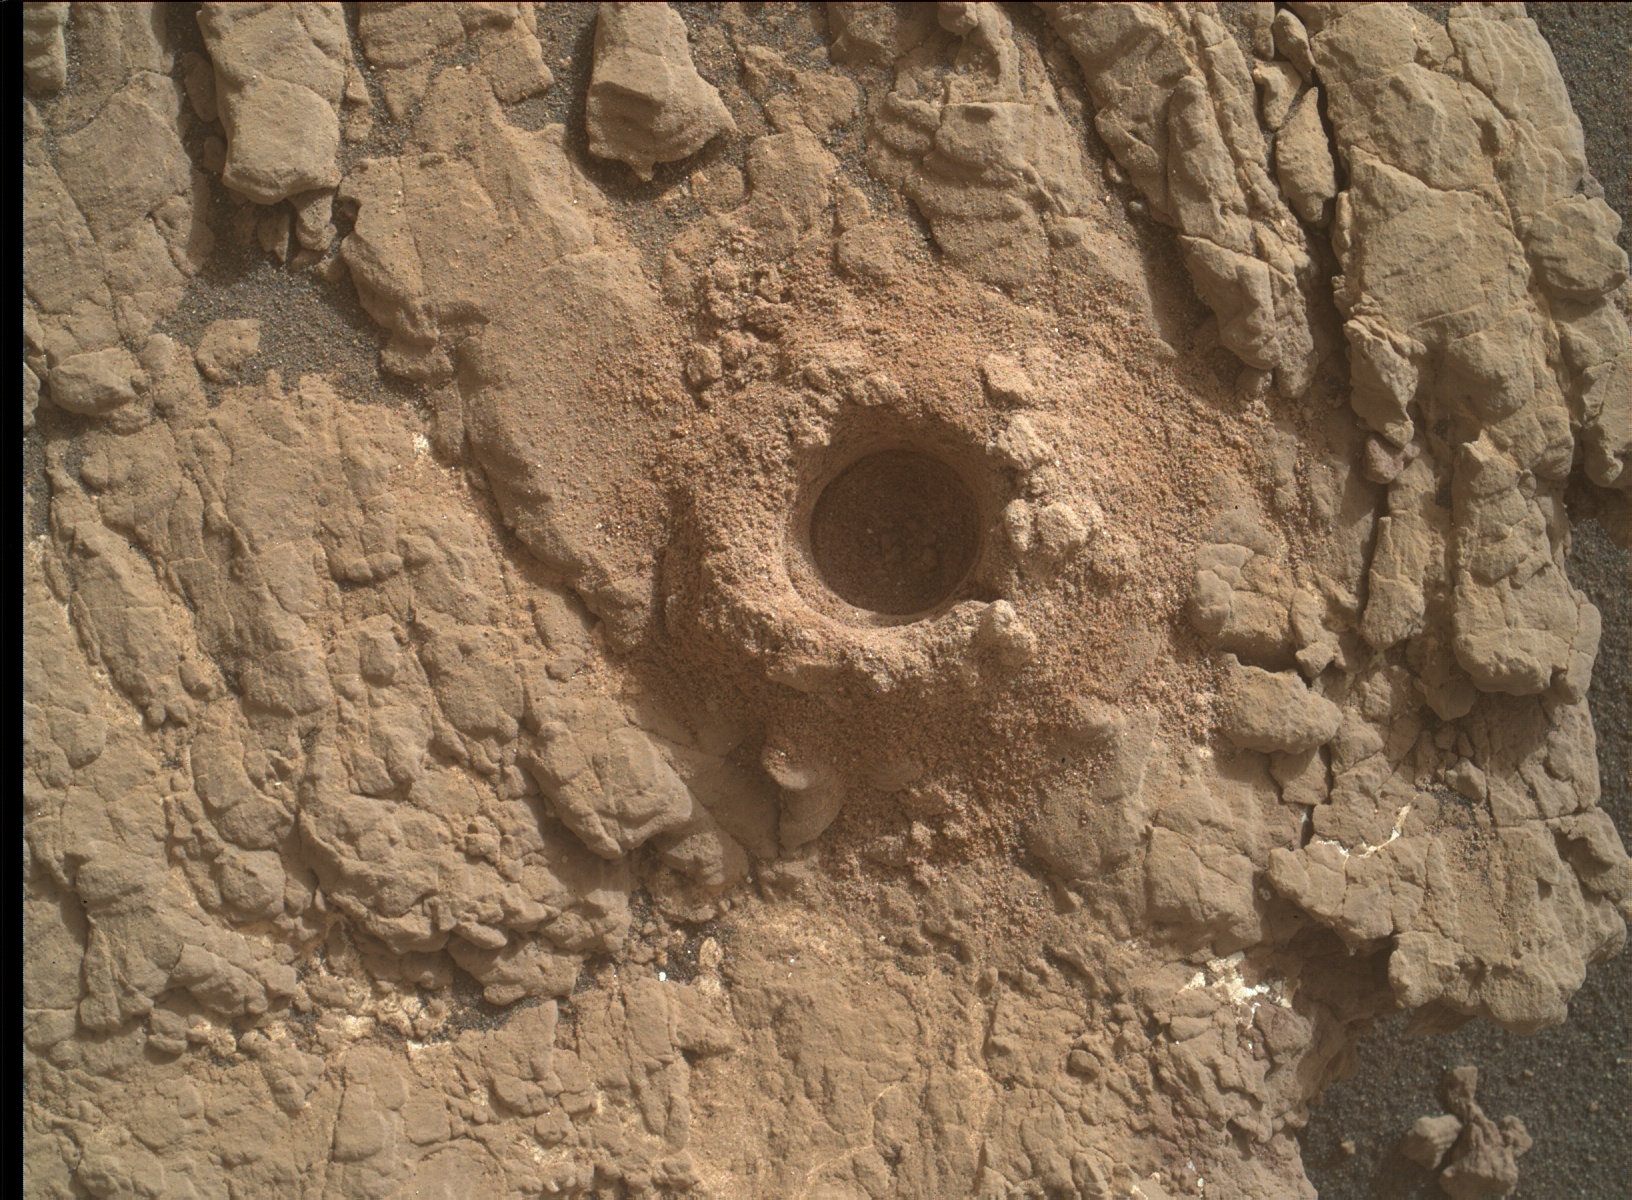 Nasa's Mars rover Curiosity acquired this image using its Mars Hand Lens Imager (MAHLI) on Sol 2402